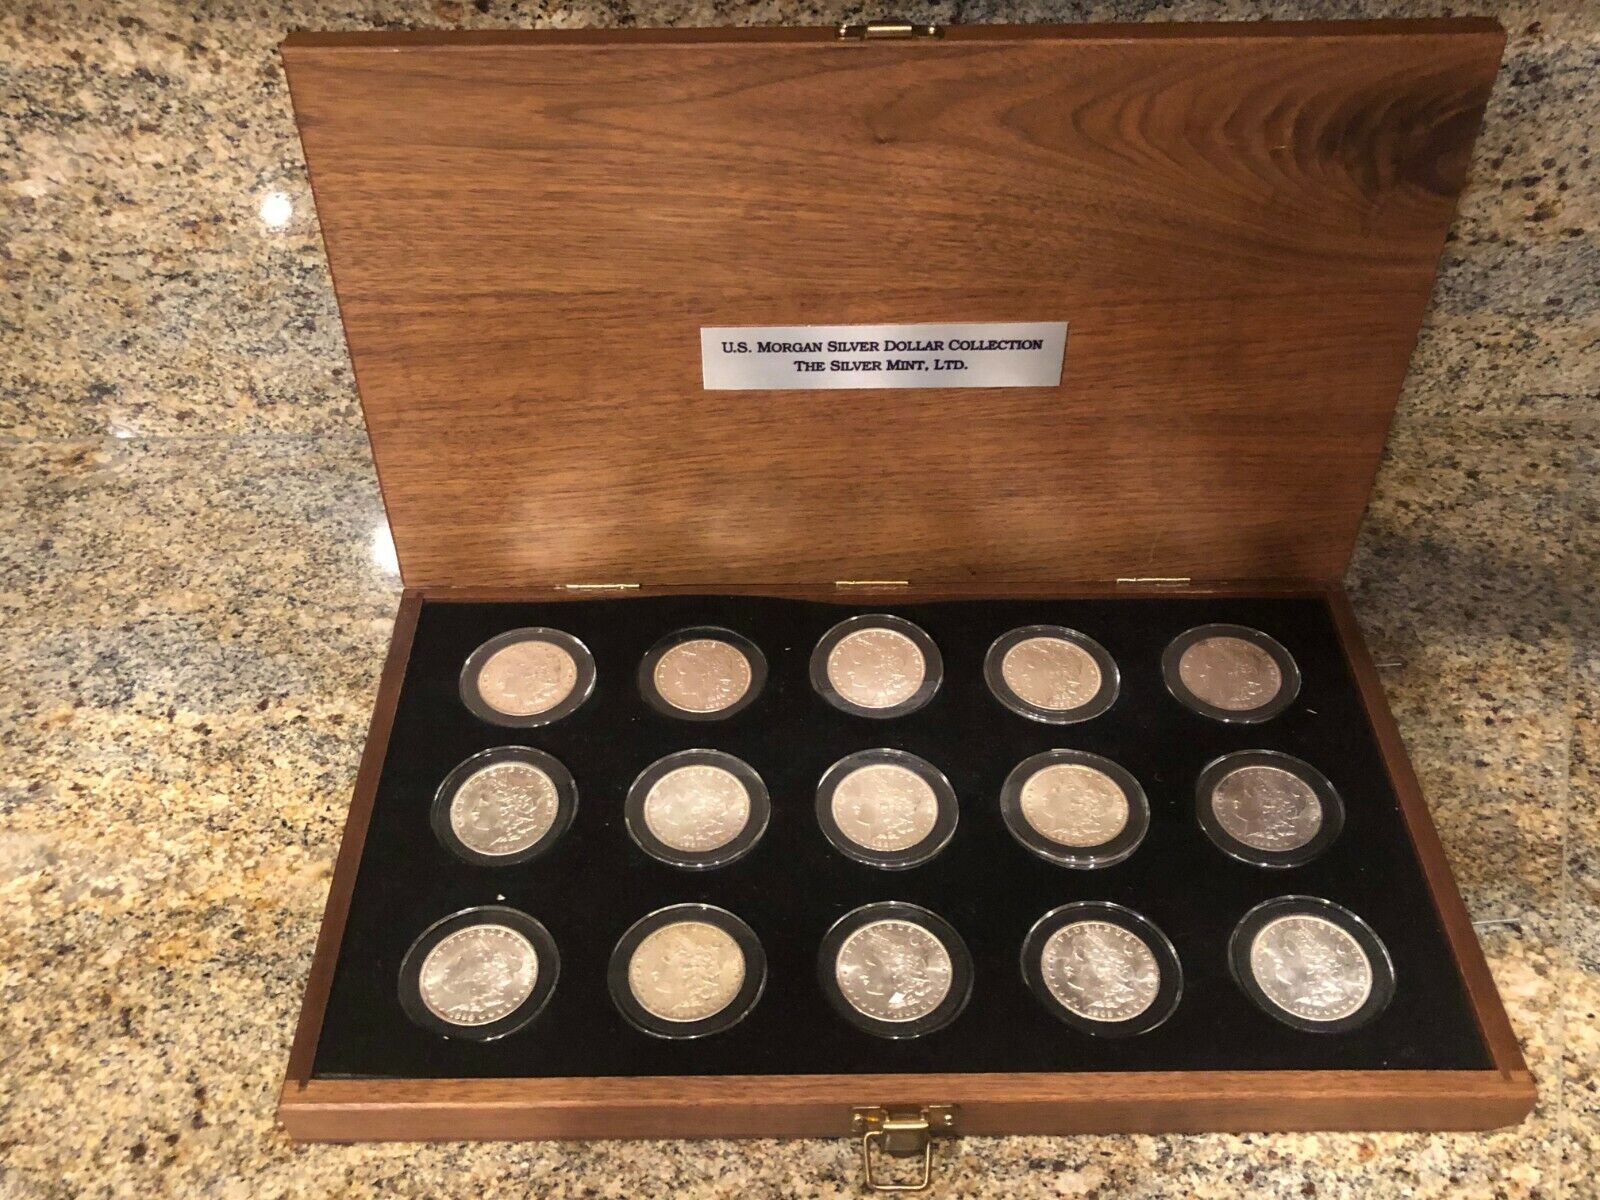 15 New Orleans Morgan Dollars Collection 1979 to 1902 in Wood Presentation Box